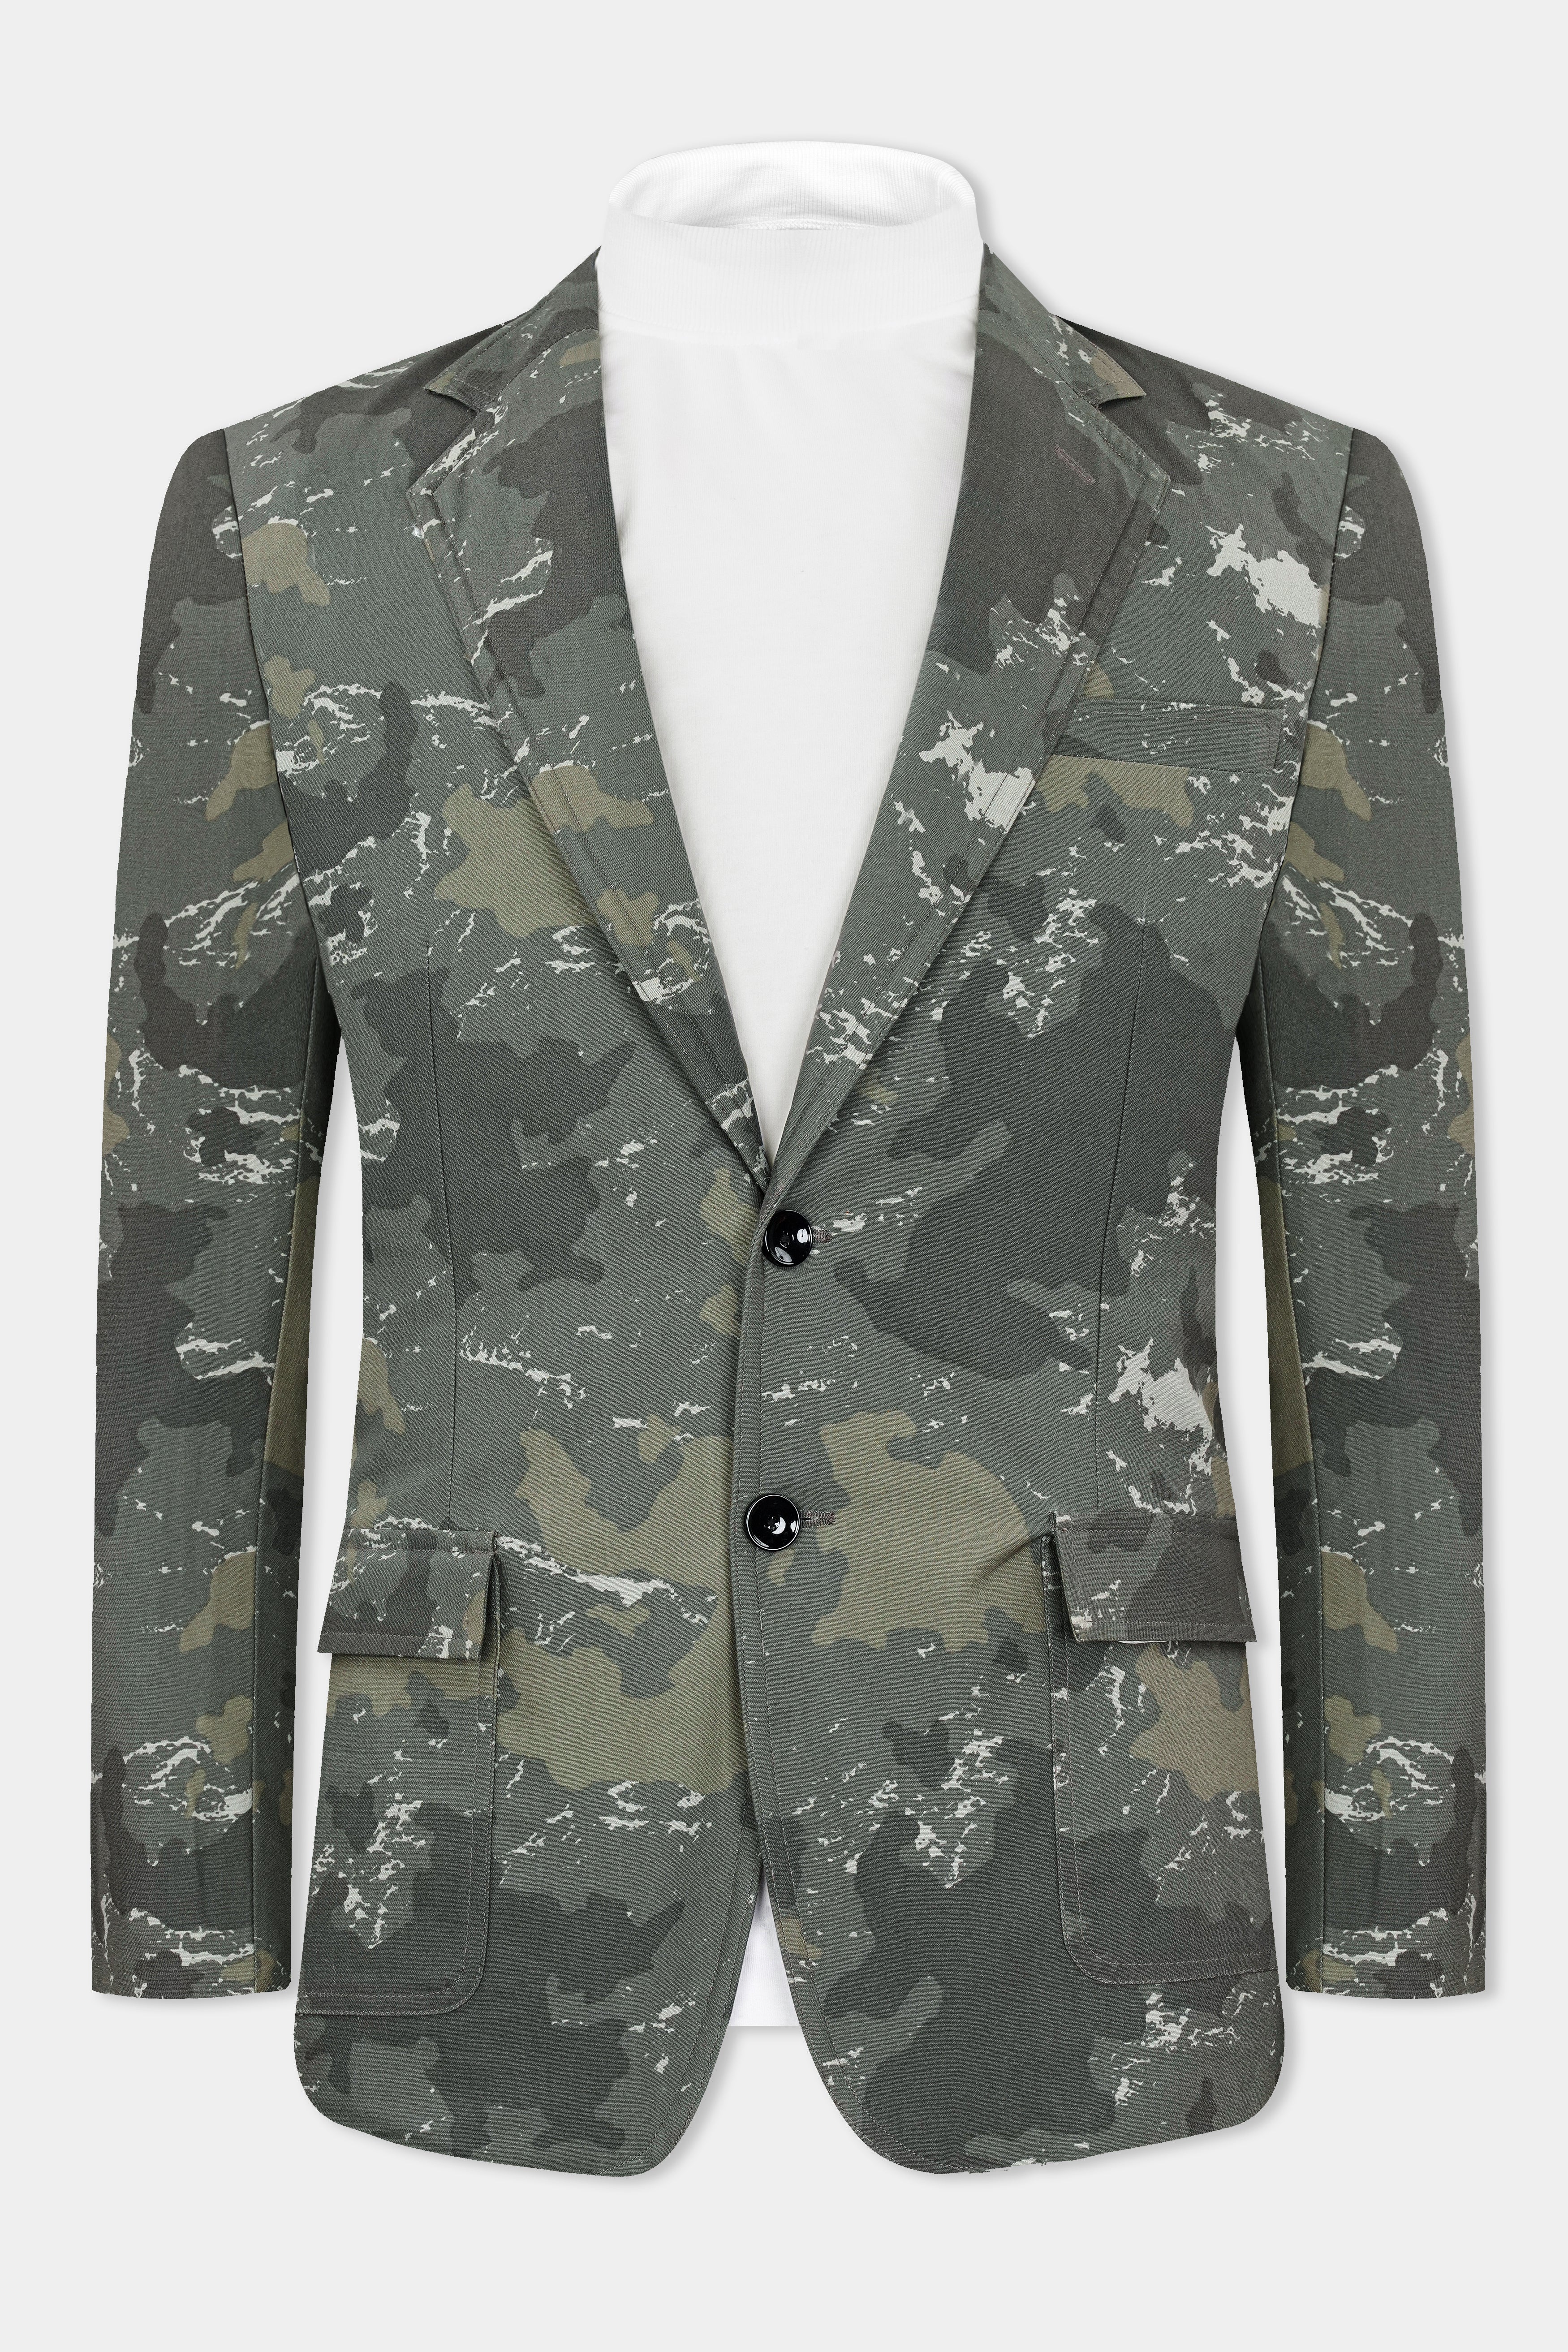 Flint Green with Fuscous Green Camouflage Premium Cotton Blazer BL3017-SB-D110-36, BL3017-SB-D110-38, BL3017-SB-D110-40, BL3017-SB-D110-42, BL3017-SB-D110-44, BL3017-SB-D110-46, BL3017-SB-D110-48, BL3017-SB-D110-50, BL3017-SB-D110-52, BL3017-SB-D110-54, BL3017-SB-D110-56, BL3017-SB-D110-58, BL3017-SB-D110-60